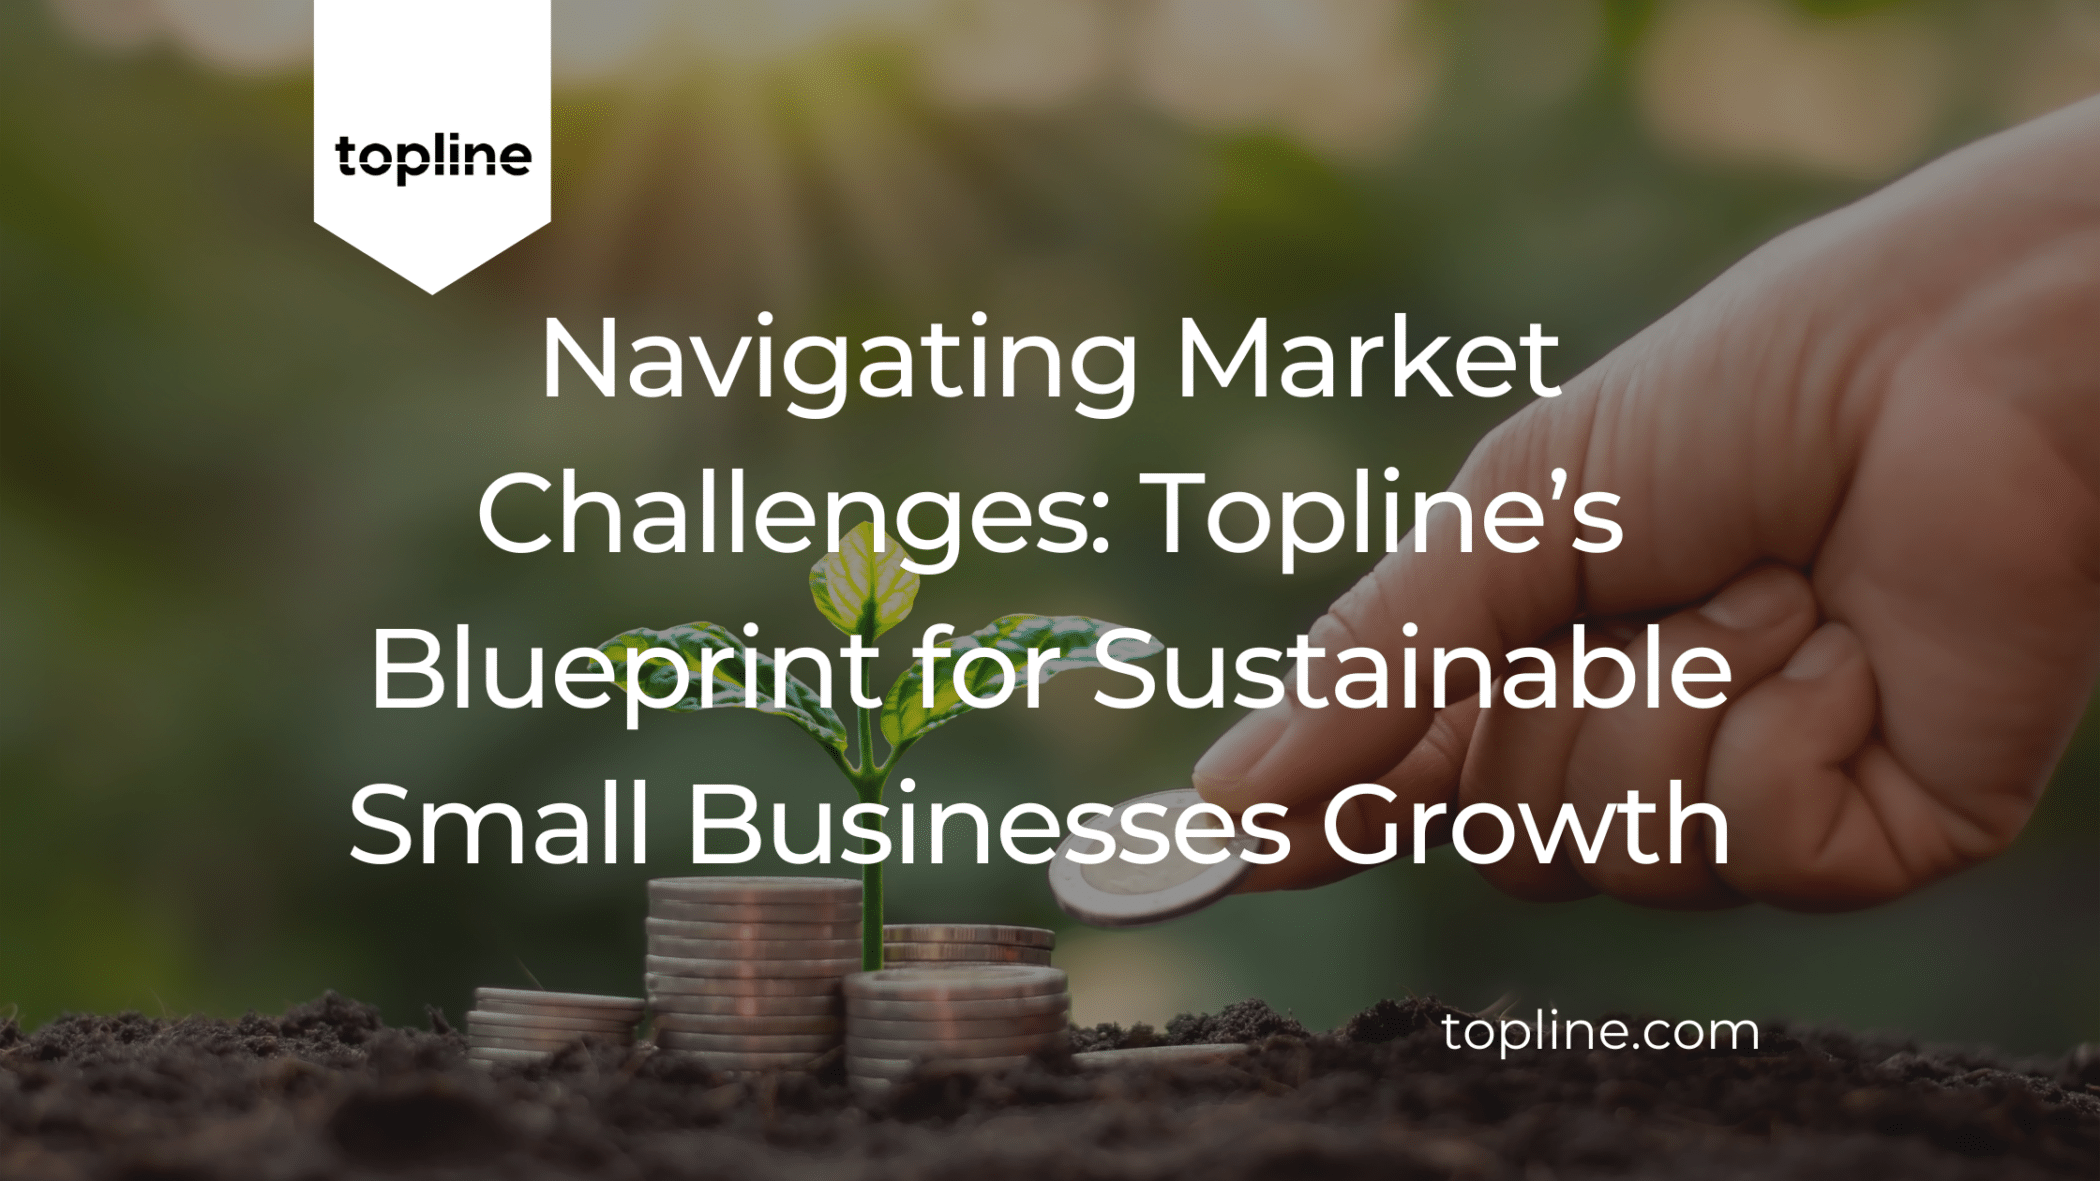 Navigating Market Challenges: Topline’s Blueprint for Sustainable Small Business Growth